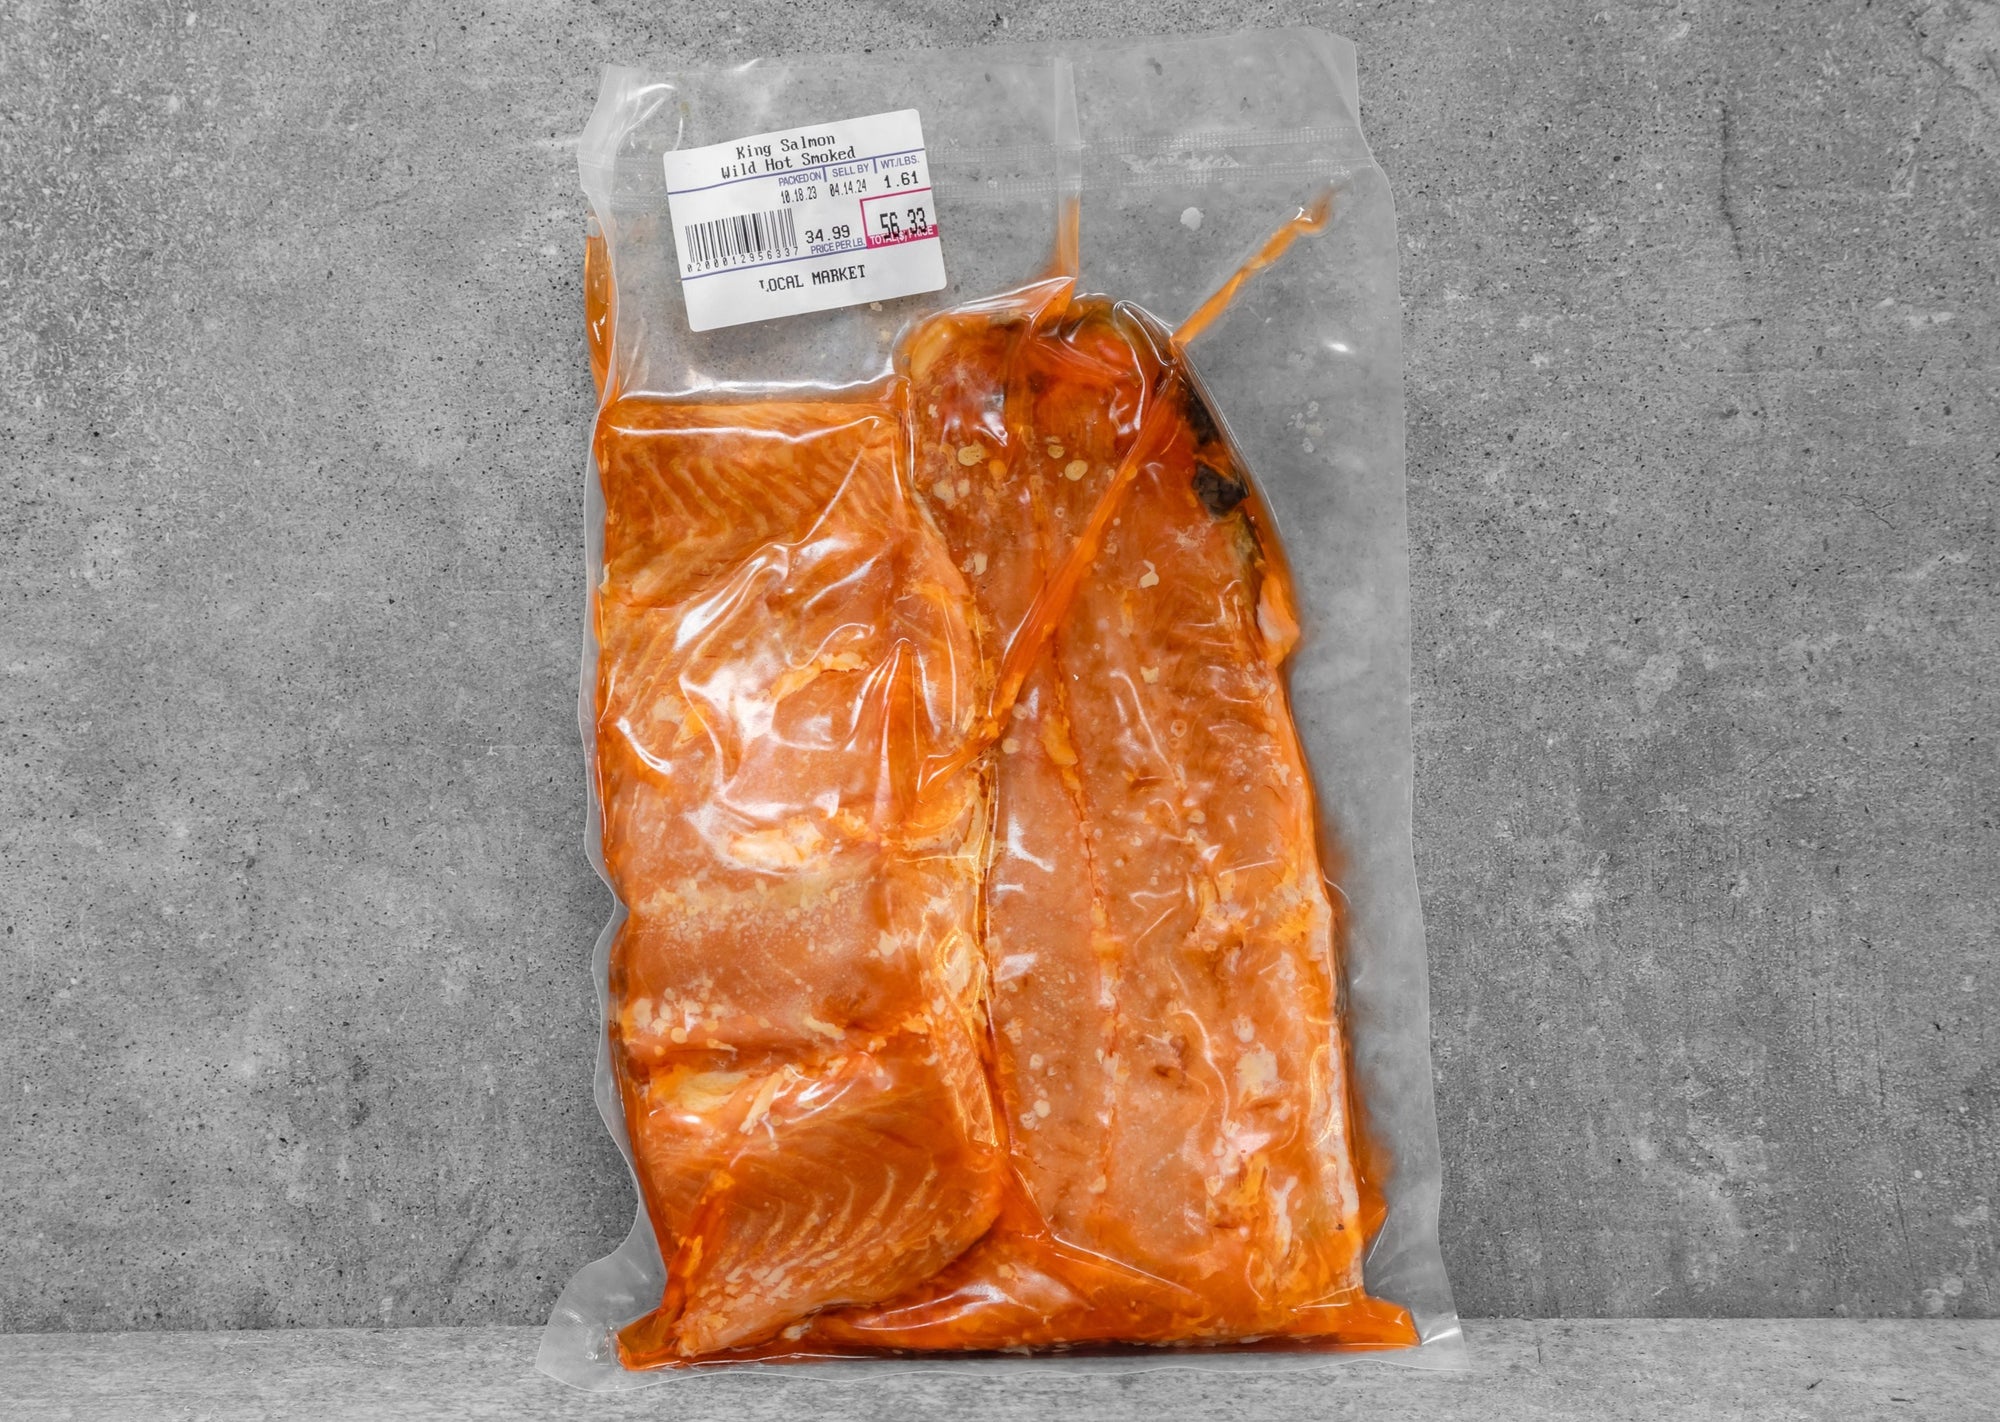 SPRING SALE 25% OFF: Hot Smoked King Salmon (From 2 LB)